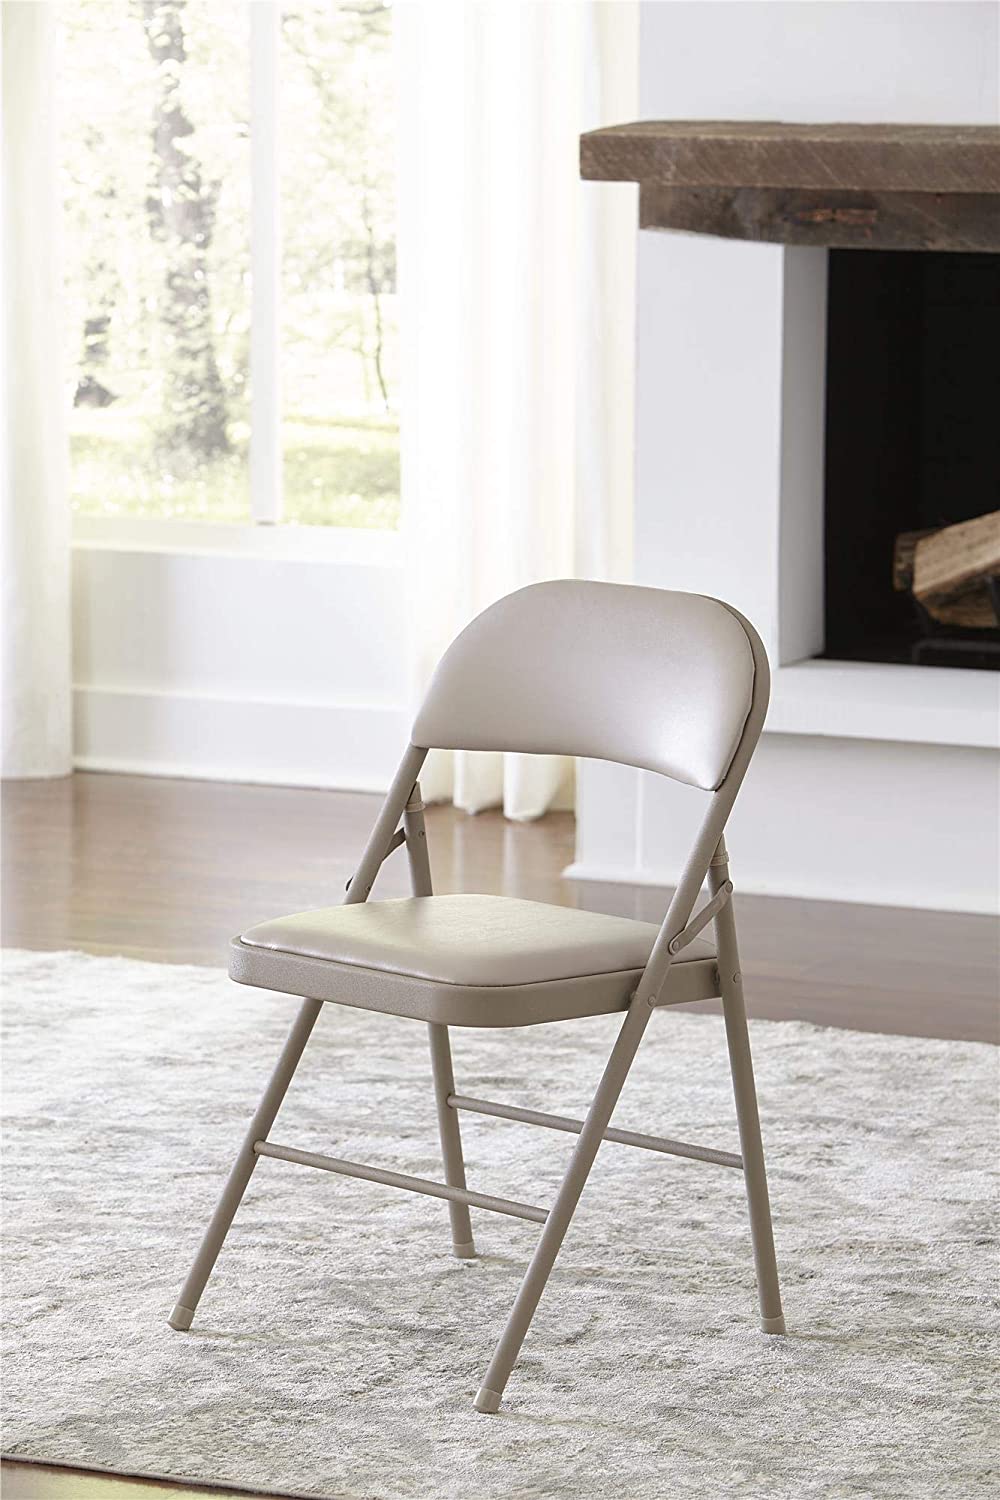 airbnb folding chairs